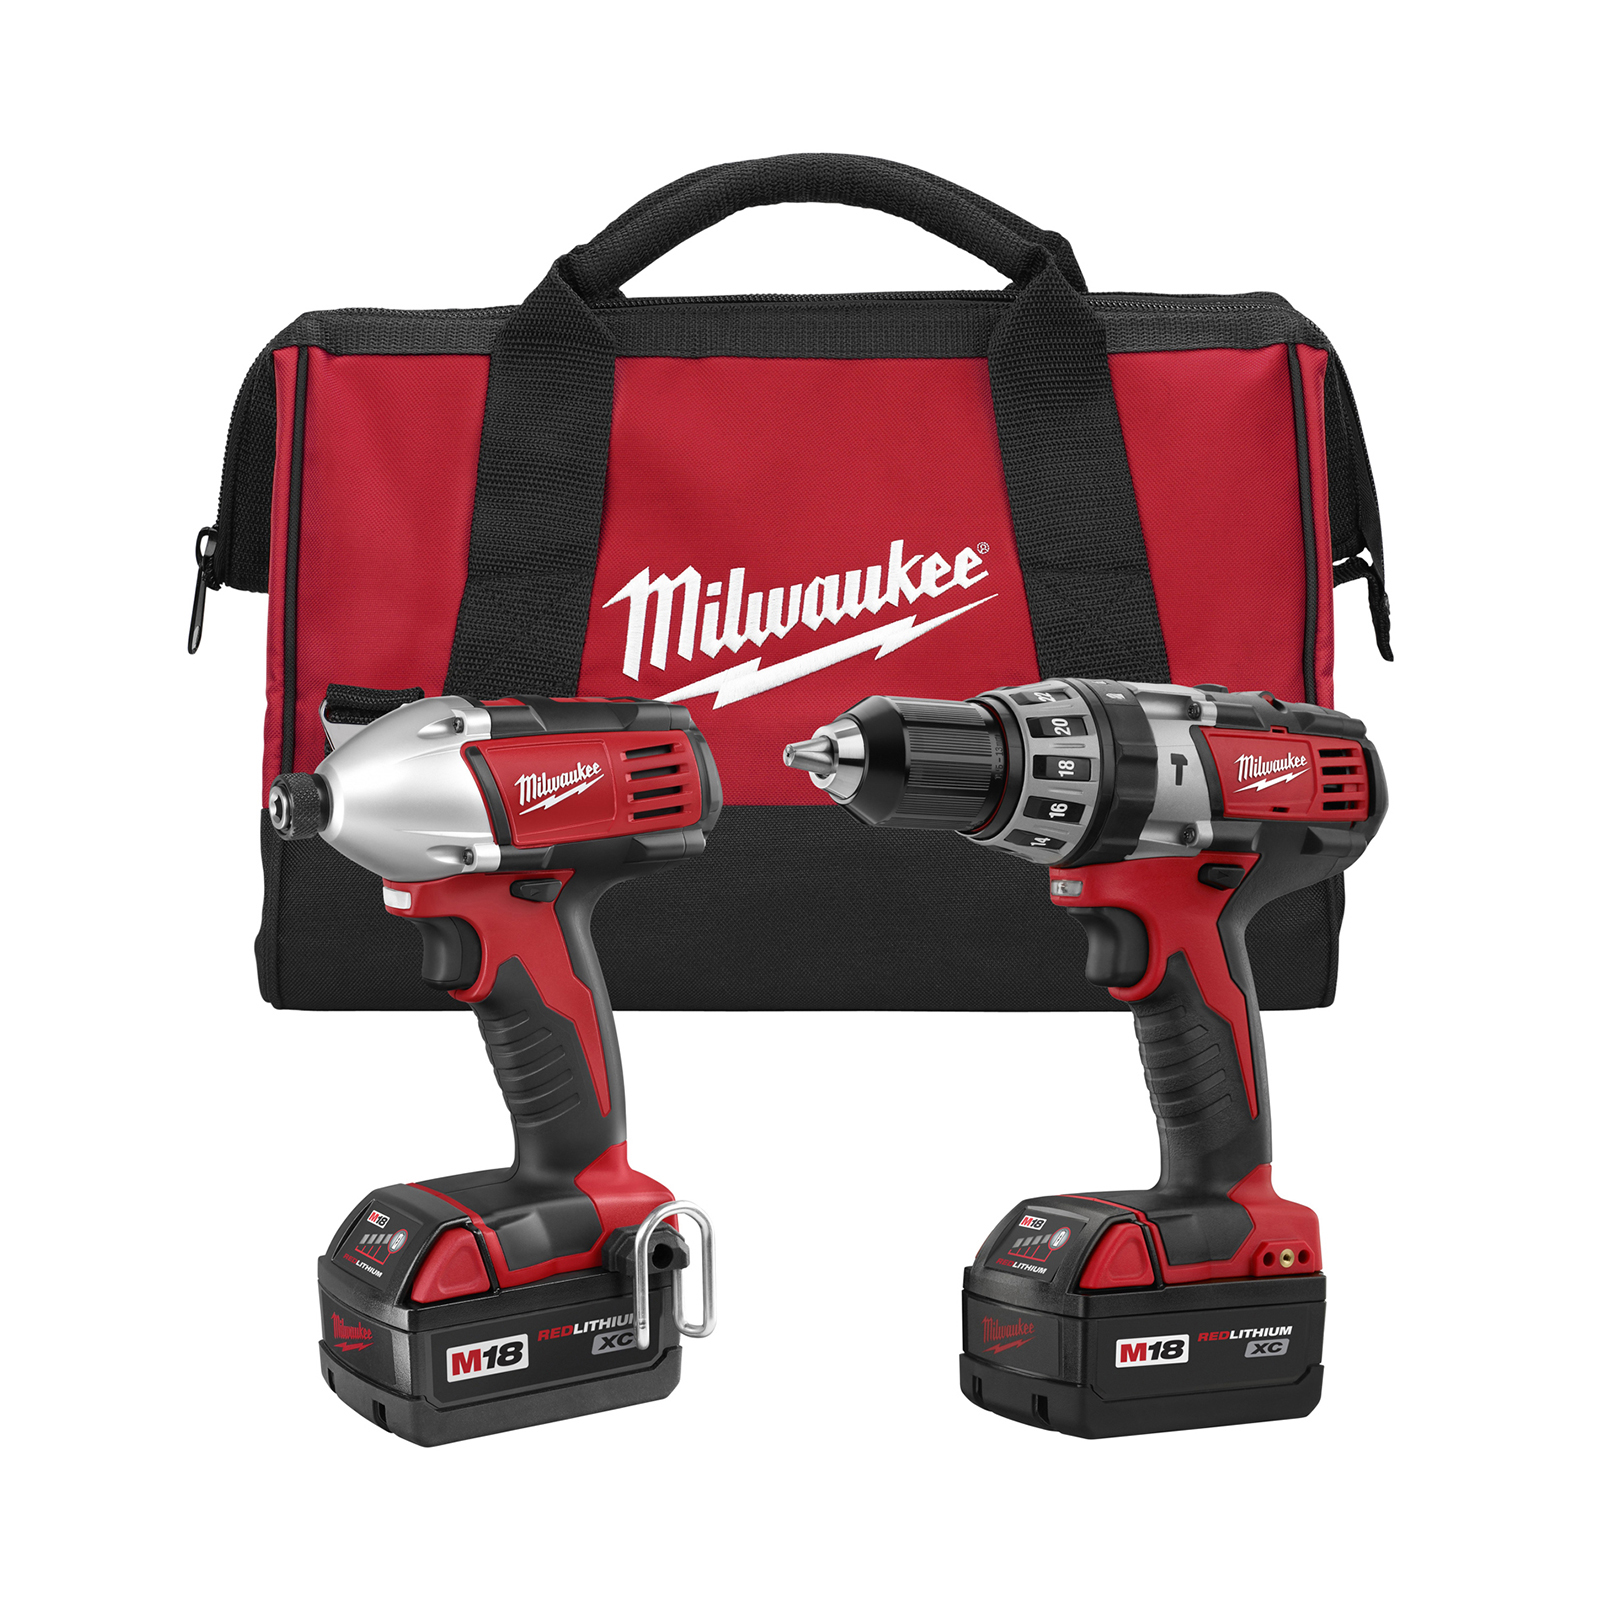 Milwaukee 2pc. Hammer Drill and Impact Driver Combo Kit